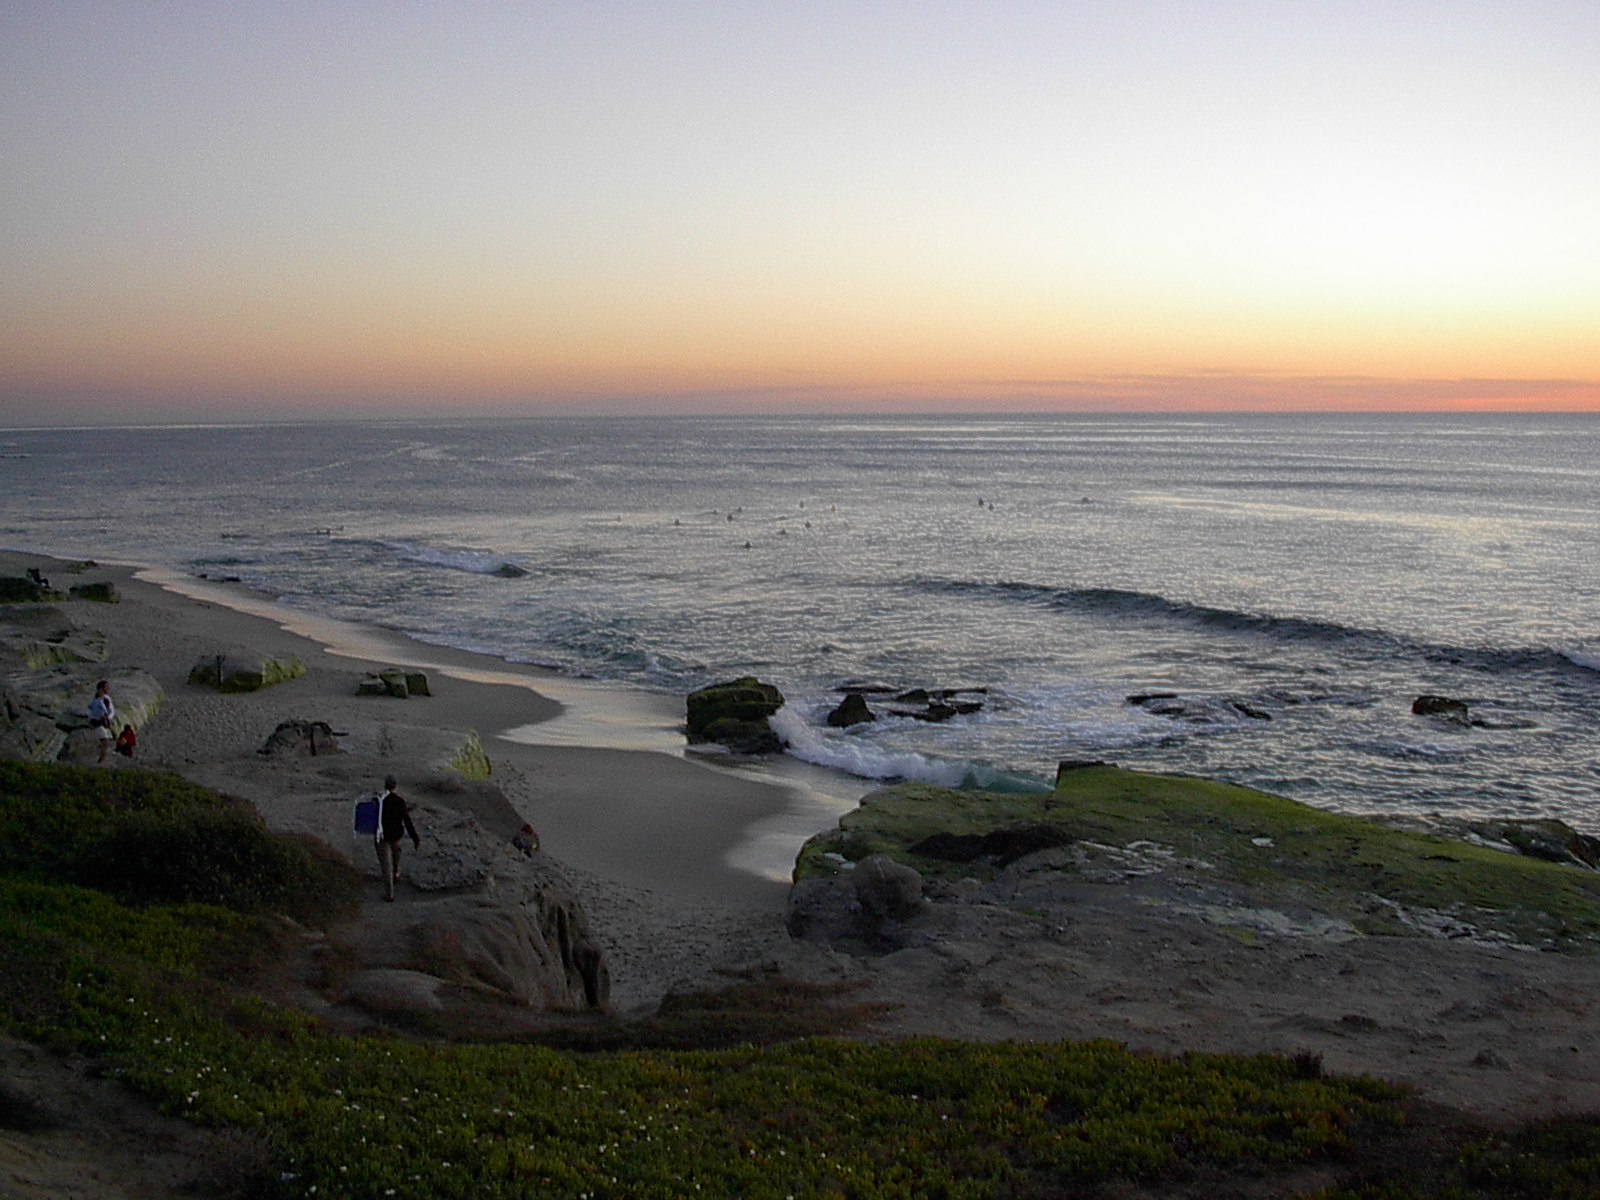 Pacific Ocean at Sunset